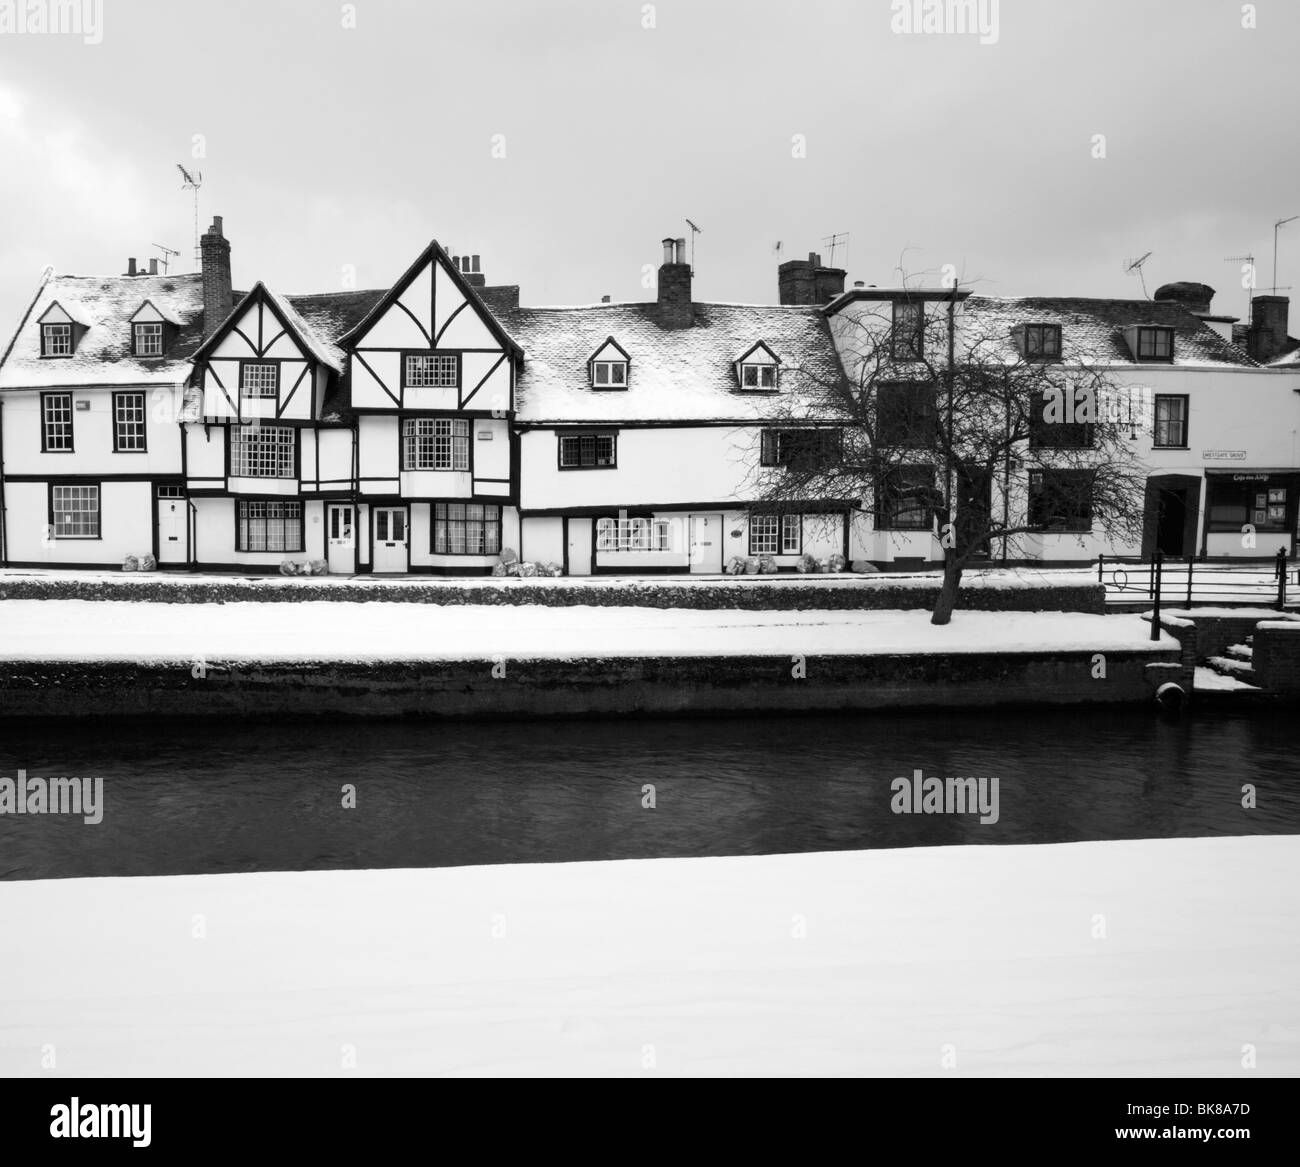 Black & white image of listed houses along the river Stour covered in snow in Canterbury, Kent, UK. Stock Photo